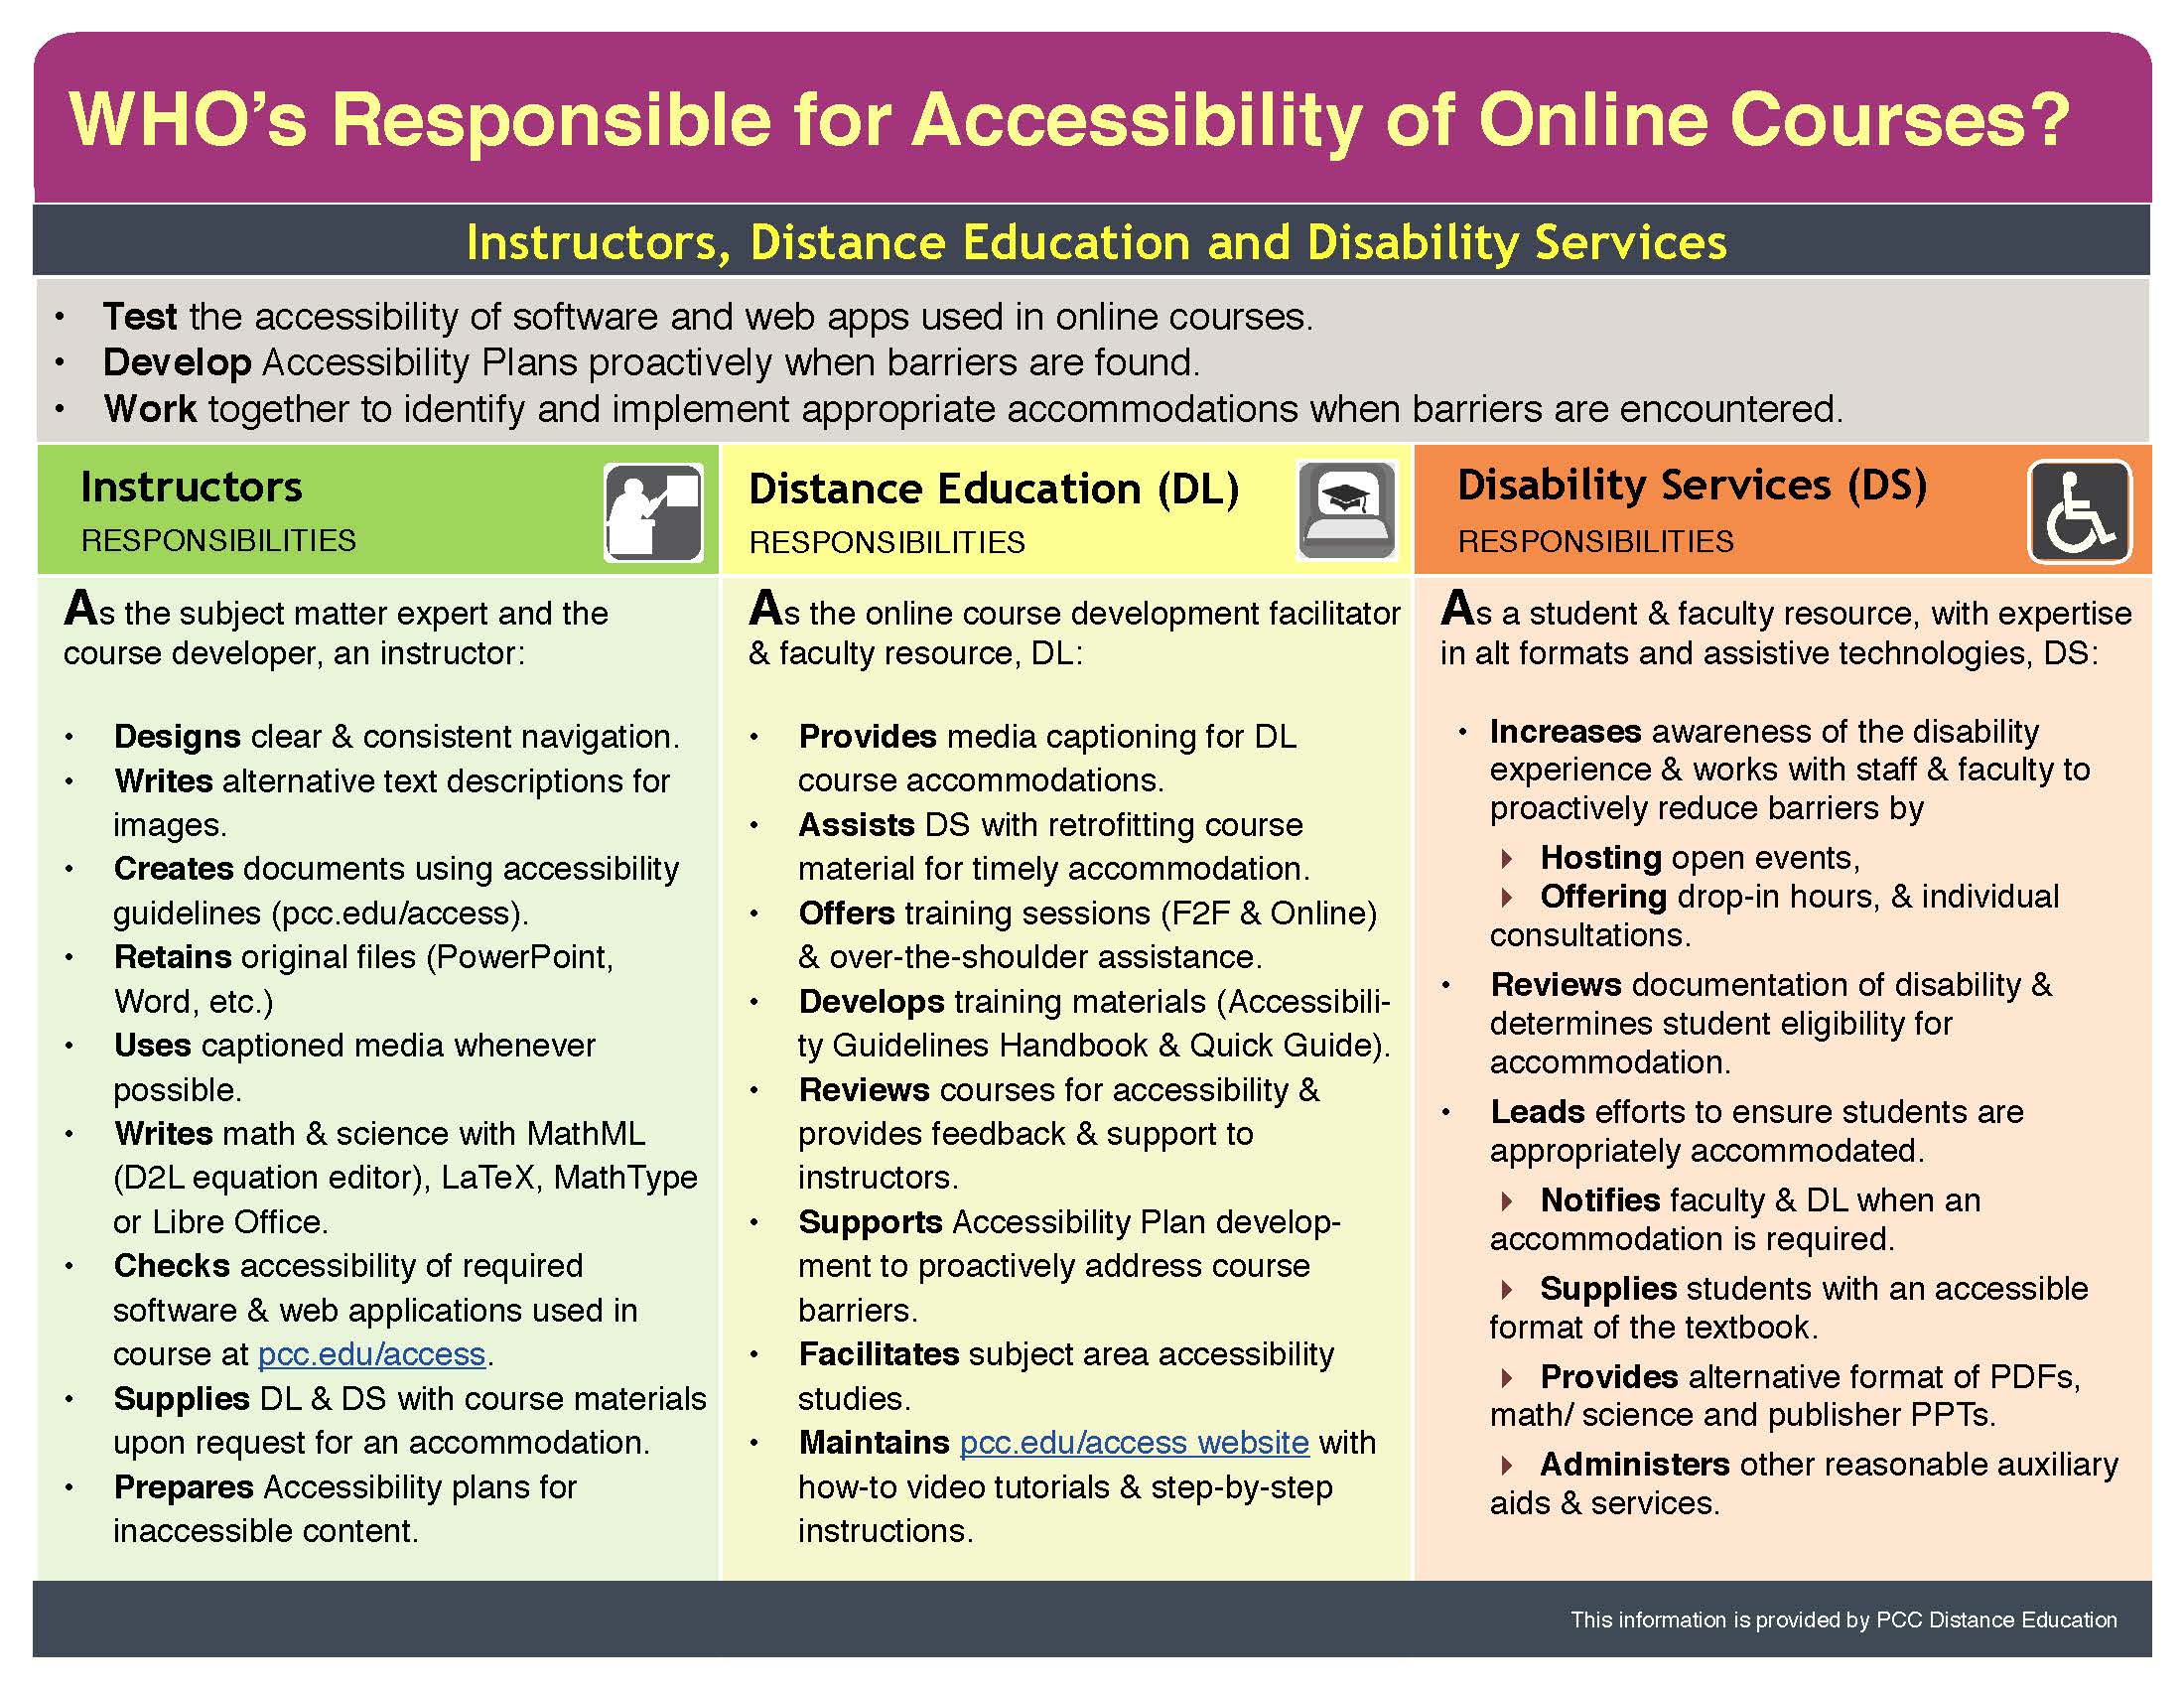 Digital accessibility experts discuss how they approach the faculty role